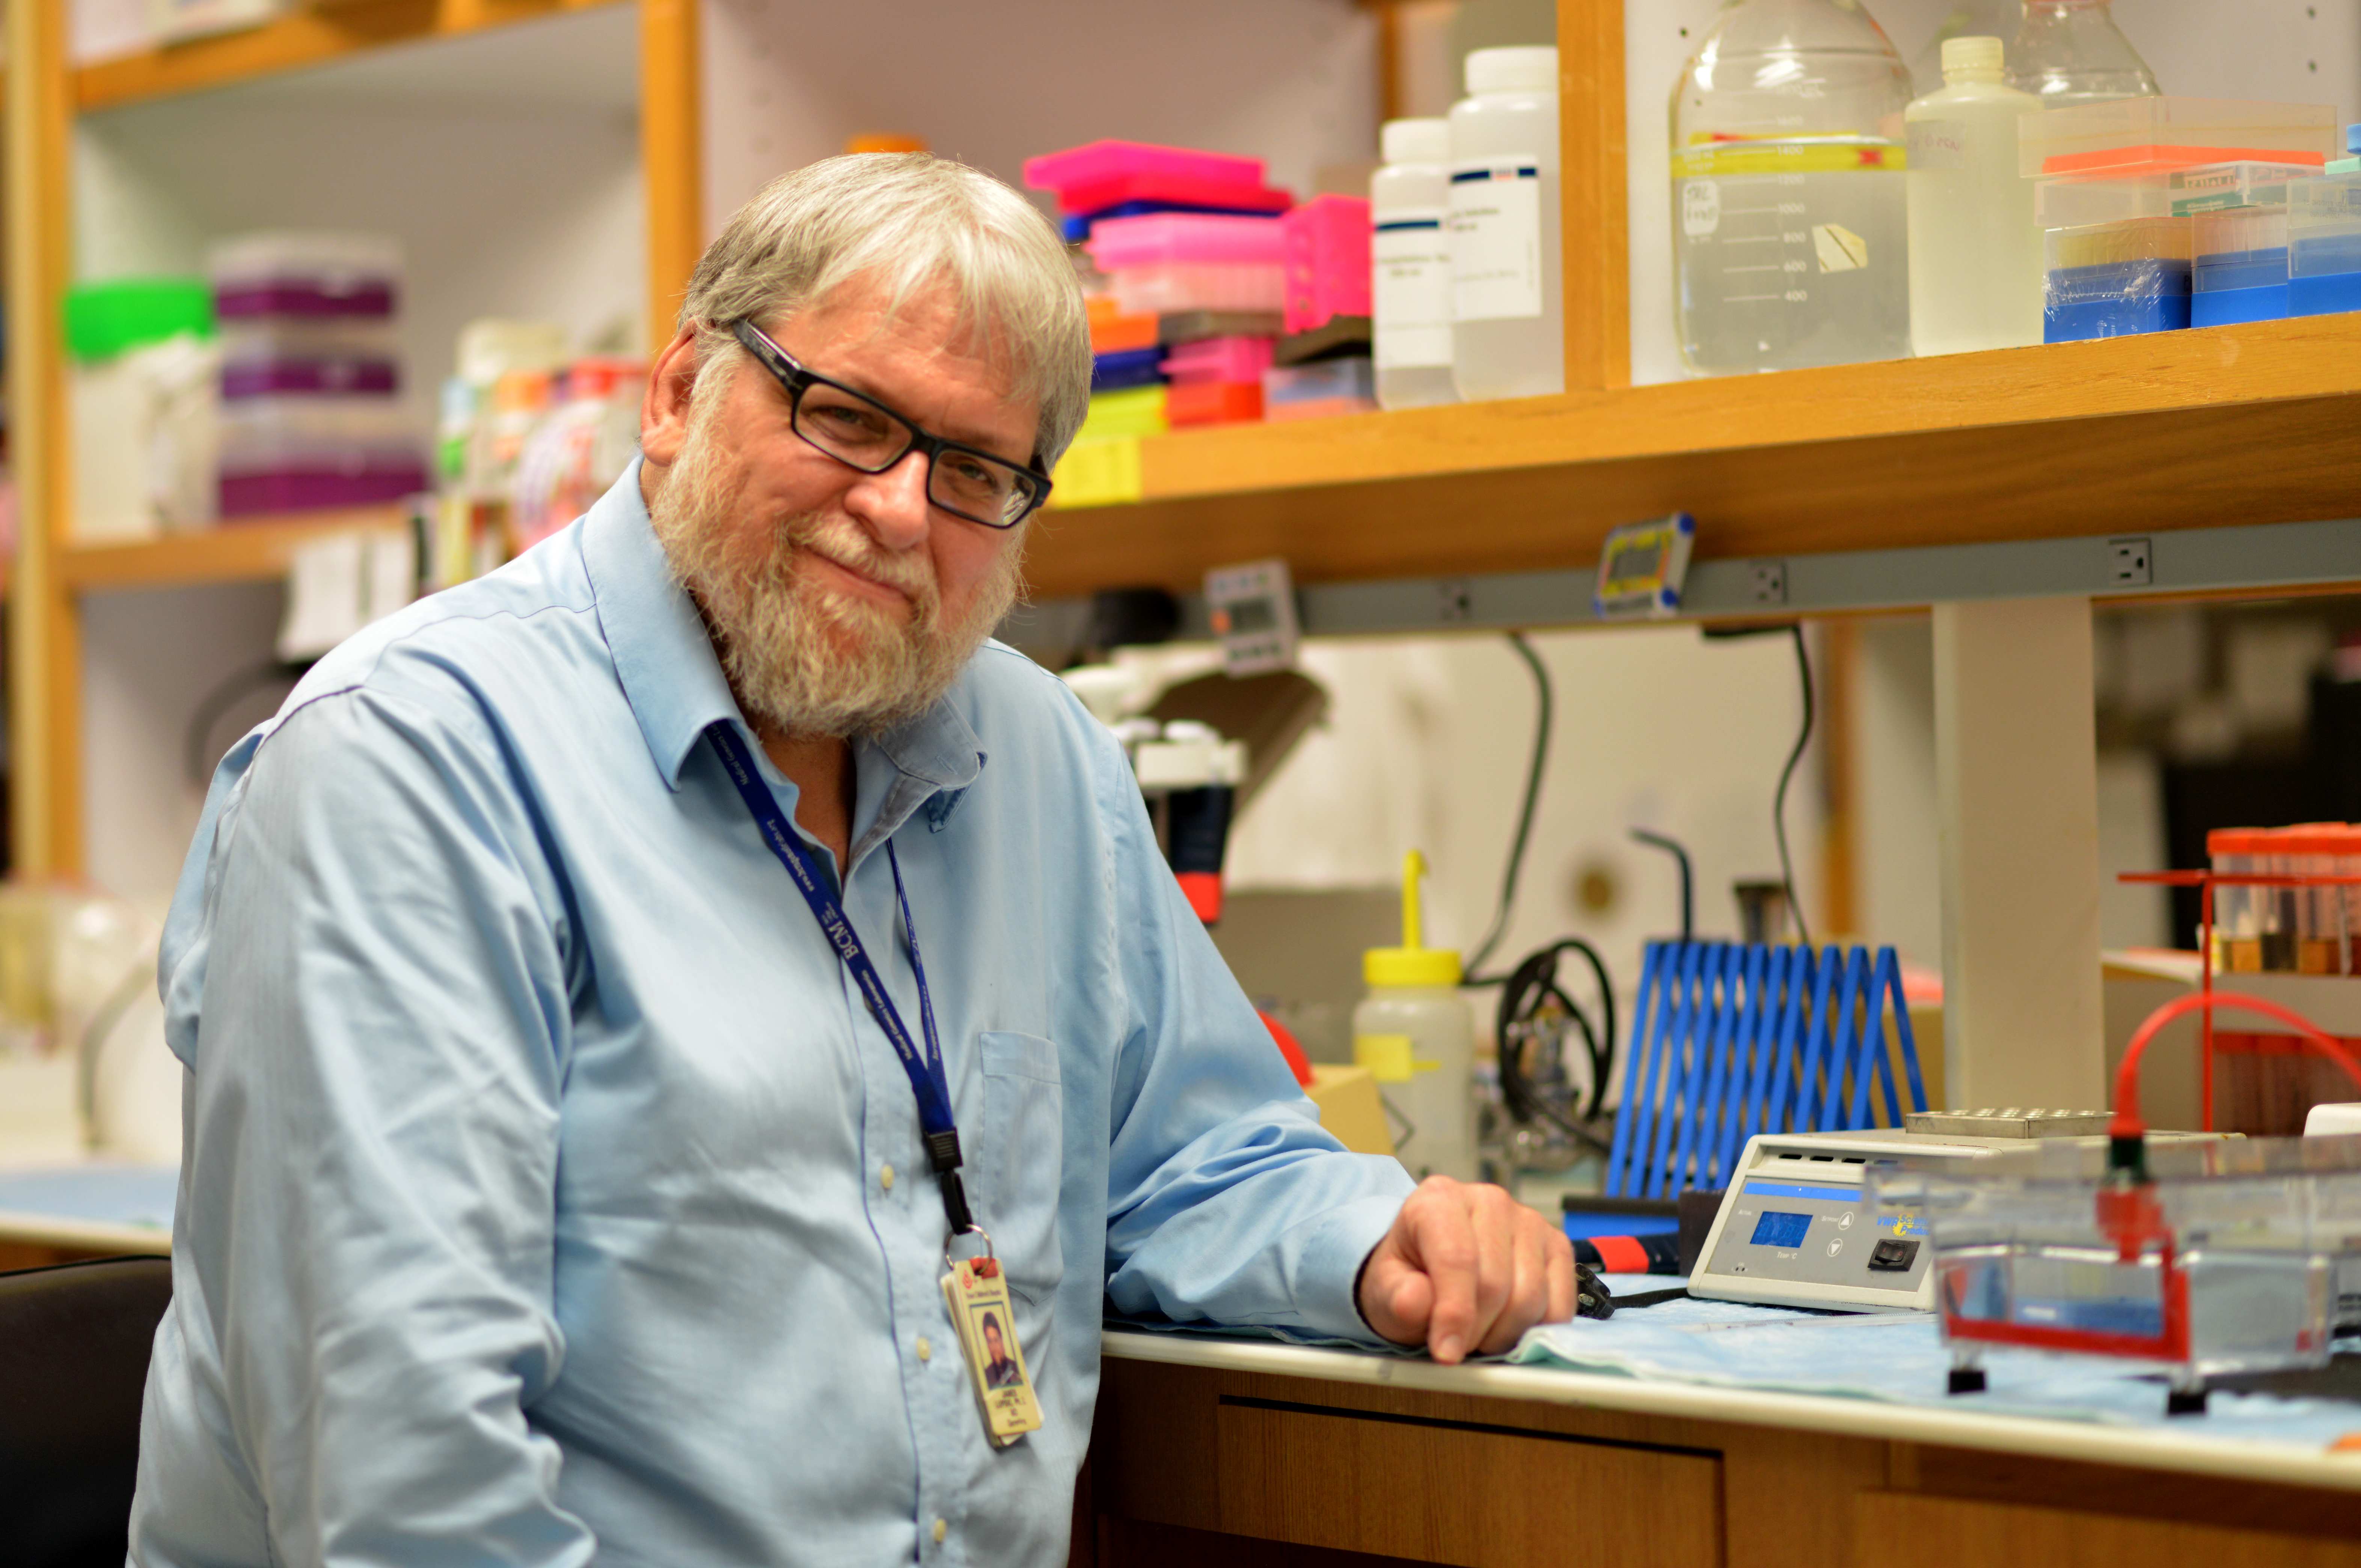 Dr. James Lupski  has been named recipient of the 2014 Environmental Mutagenesis and Genomics Society Award for his extensive contributions towards characterizing human mutations and linking them to disease.